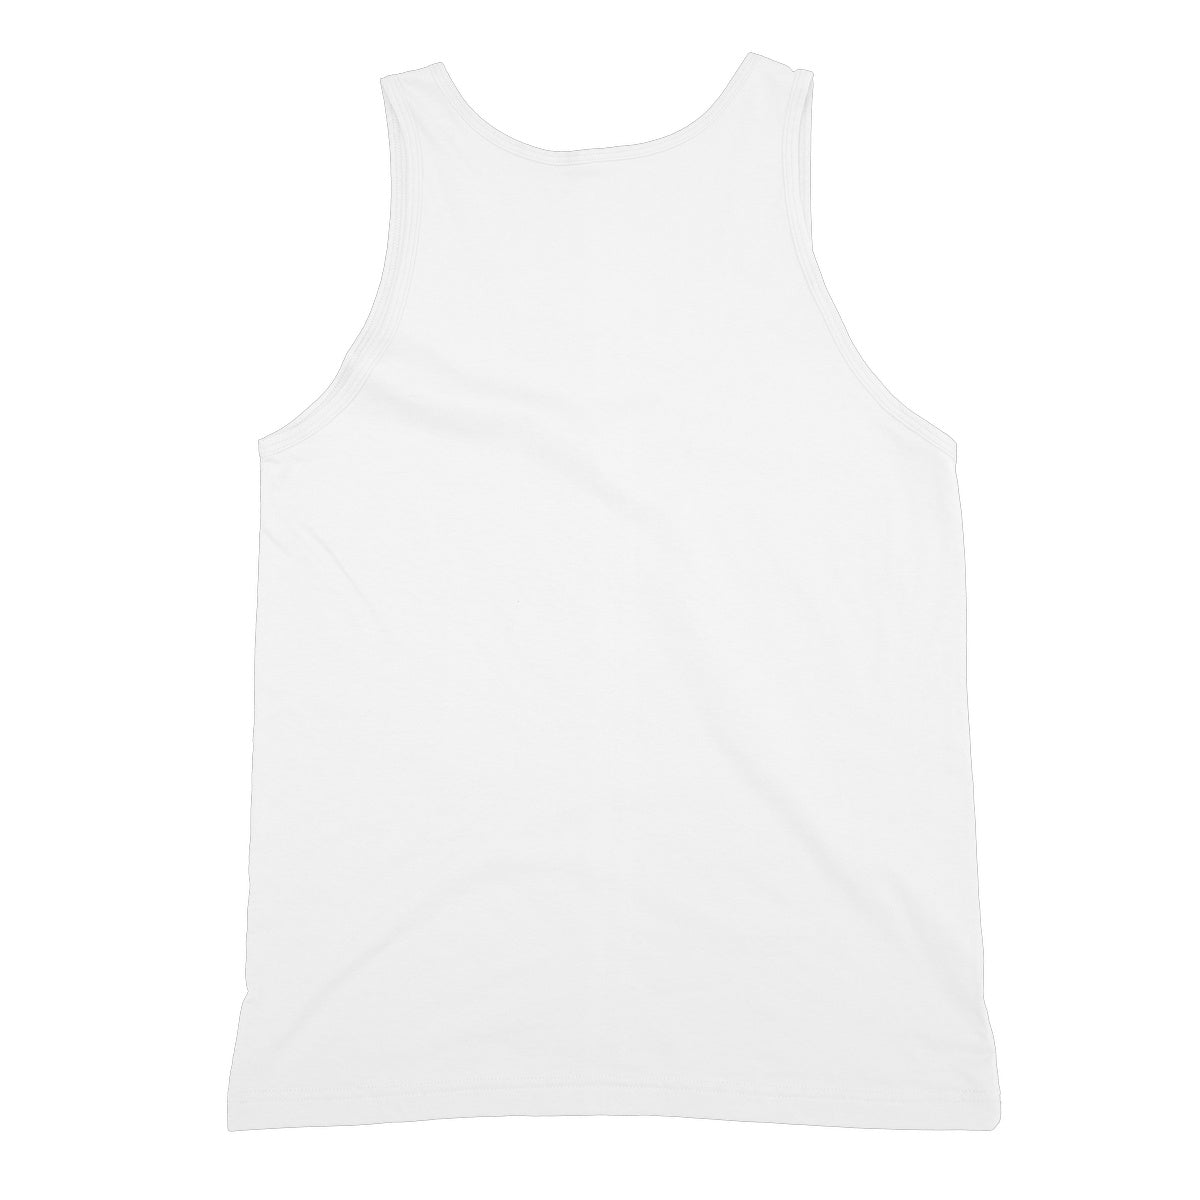 The Walross Softstyle Tank Top.